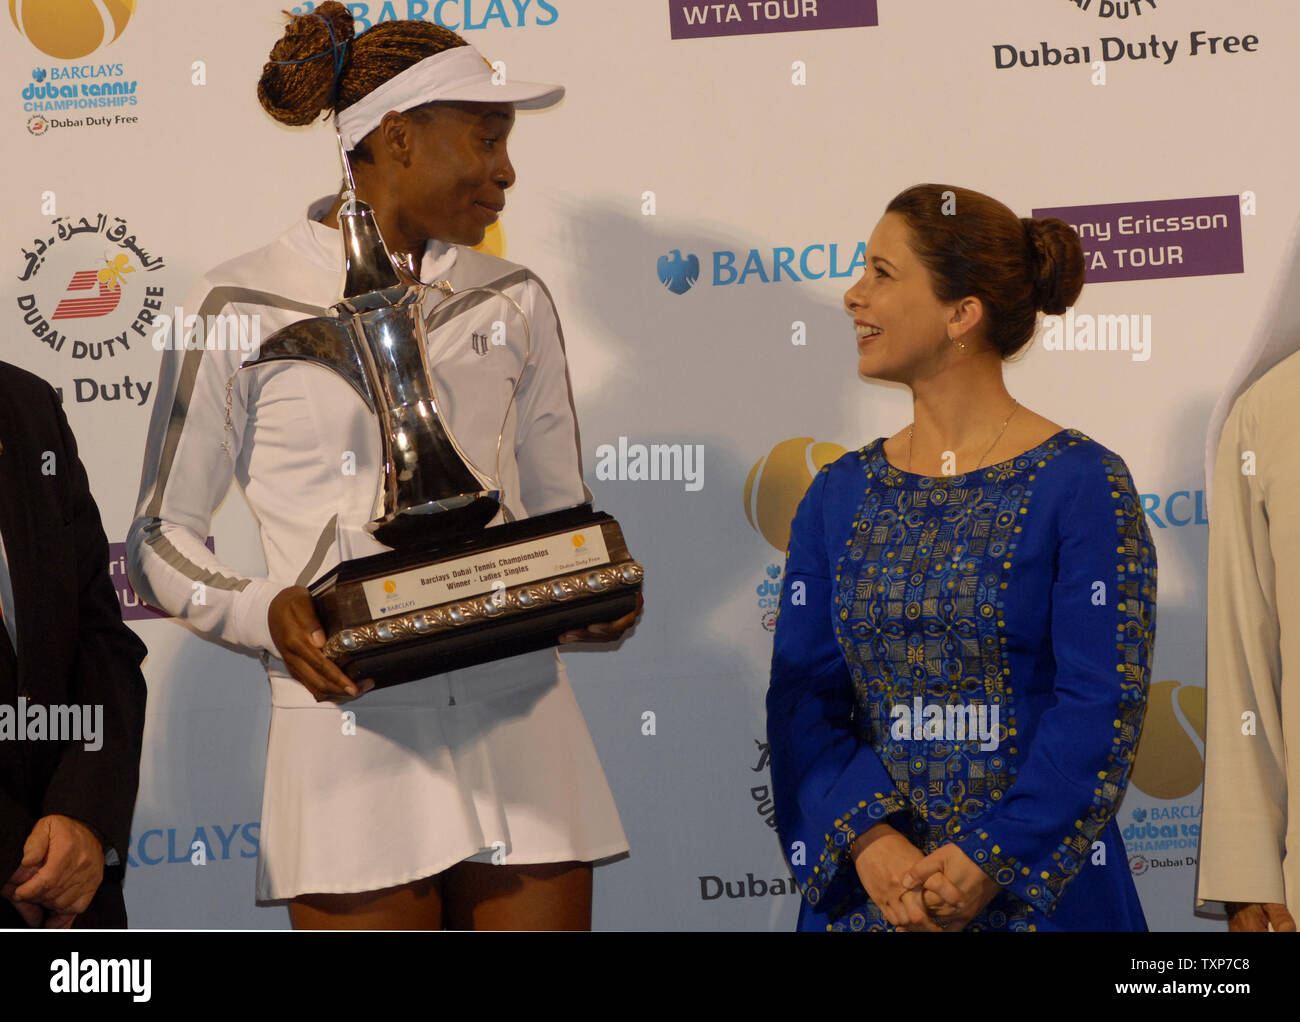 The world No. 6, Venus Williams hold her trophy after it was presented to her by Princess Haya (R) the wife of the ruler of Dubai, Sheikh Mohammed bin Rashid El Maktoum. Williams defeated Virginie Razzano from France in the finals of the Women's Dubai Championships, Saturday February 21, 2009.  Williams won the match 6-4, 6-2. (UPI Photo/Norbert Schiller) Stock Photo